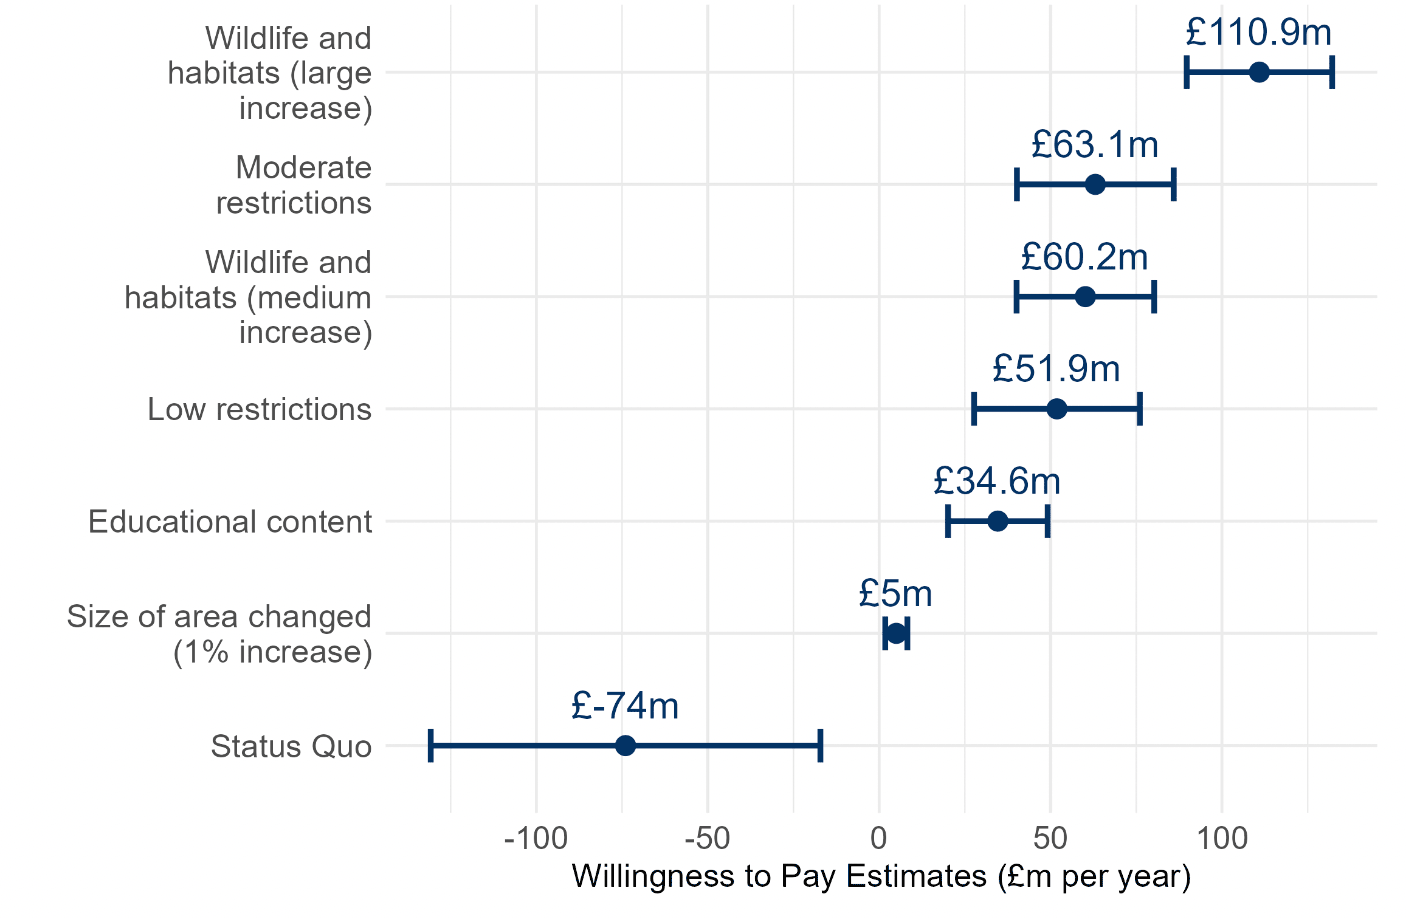 Chart showing aggregate willingness to pay estimates (£m per year) for each statistically significant attribute (as detailed in text above)